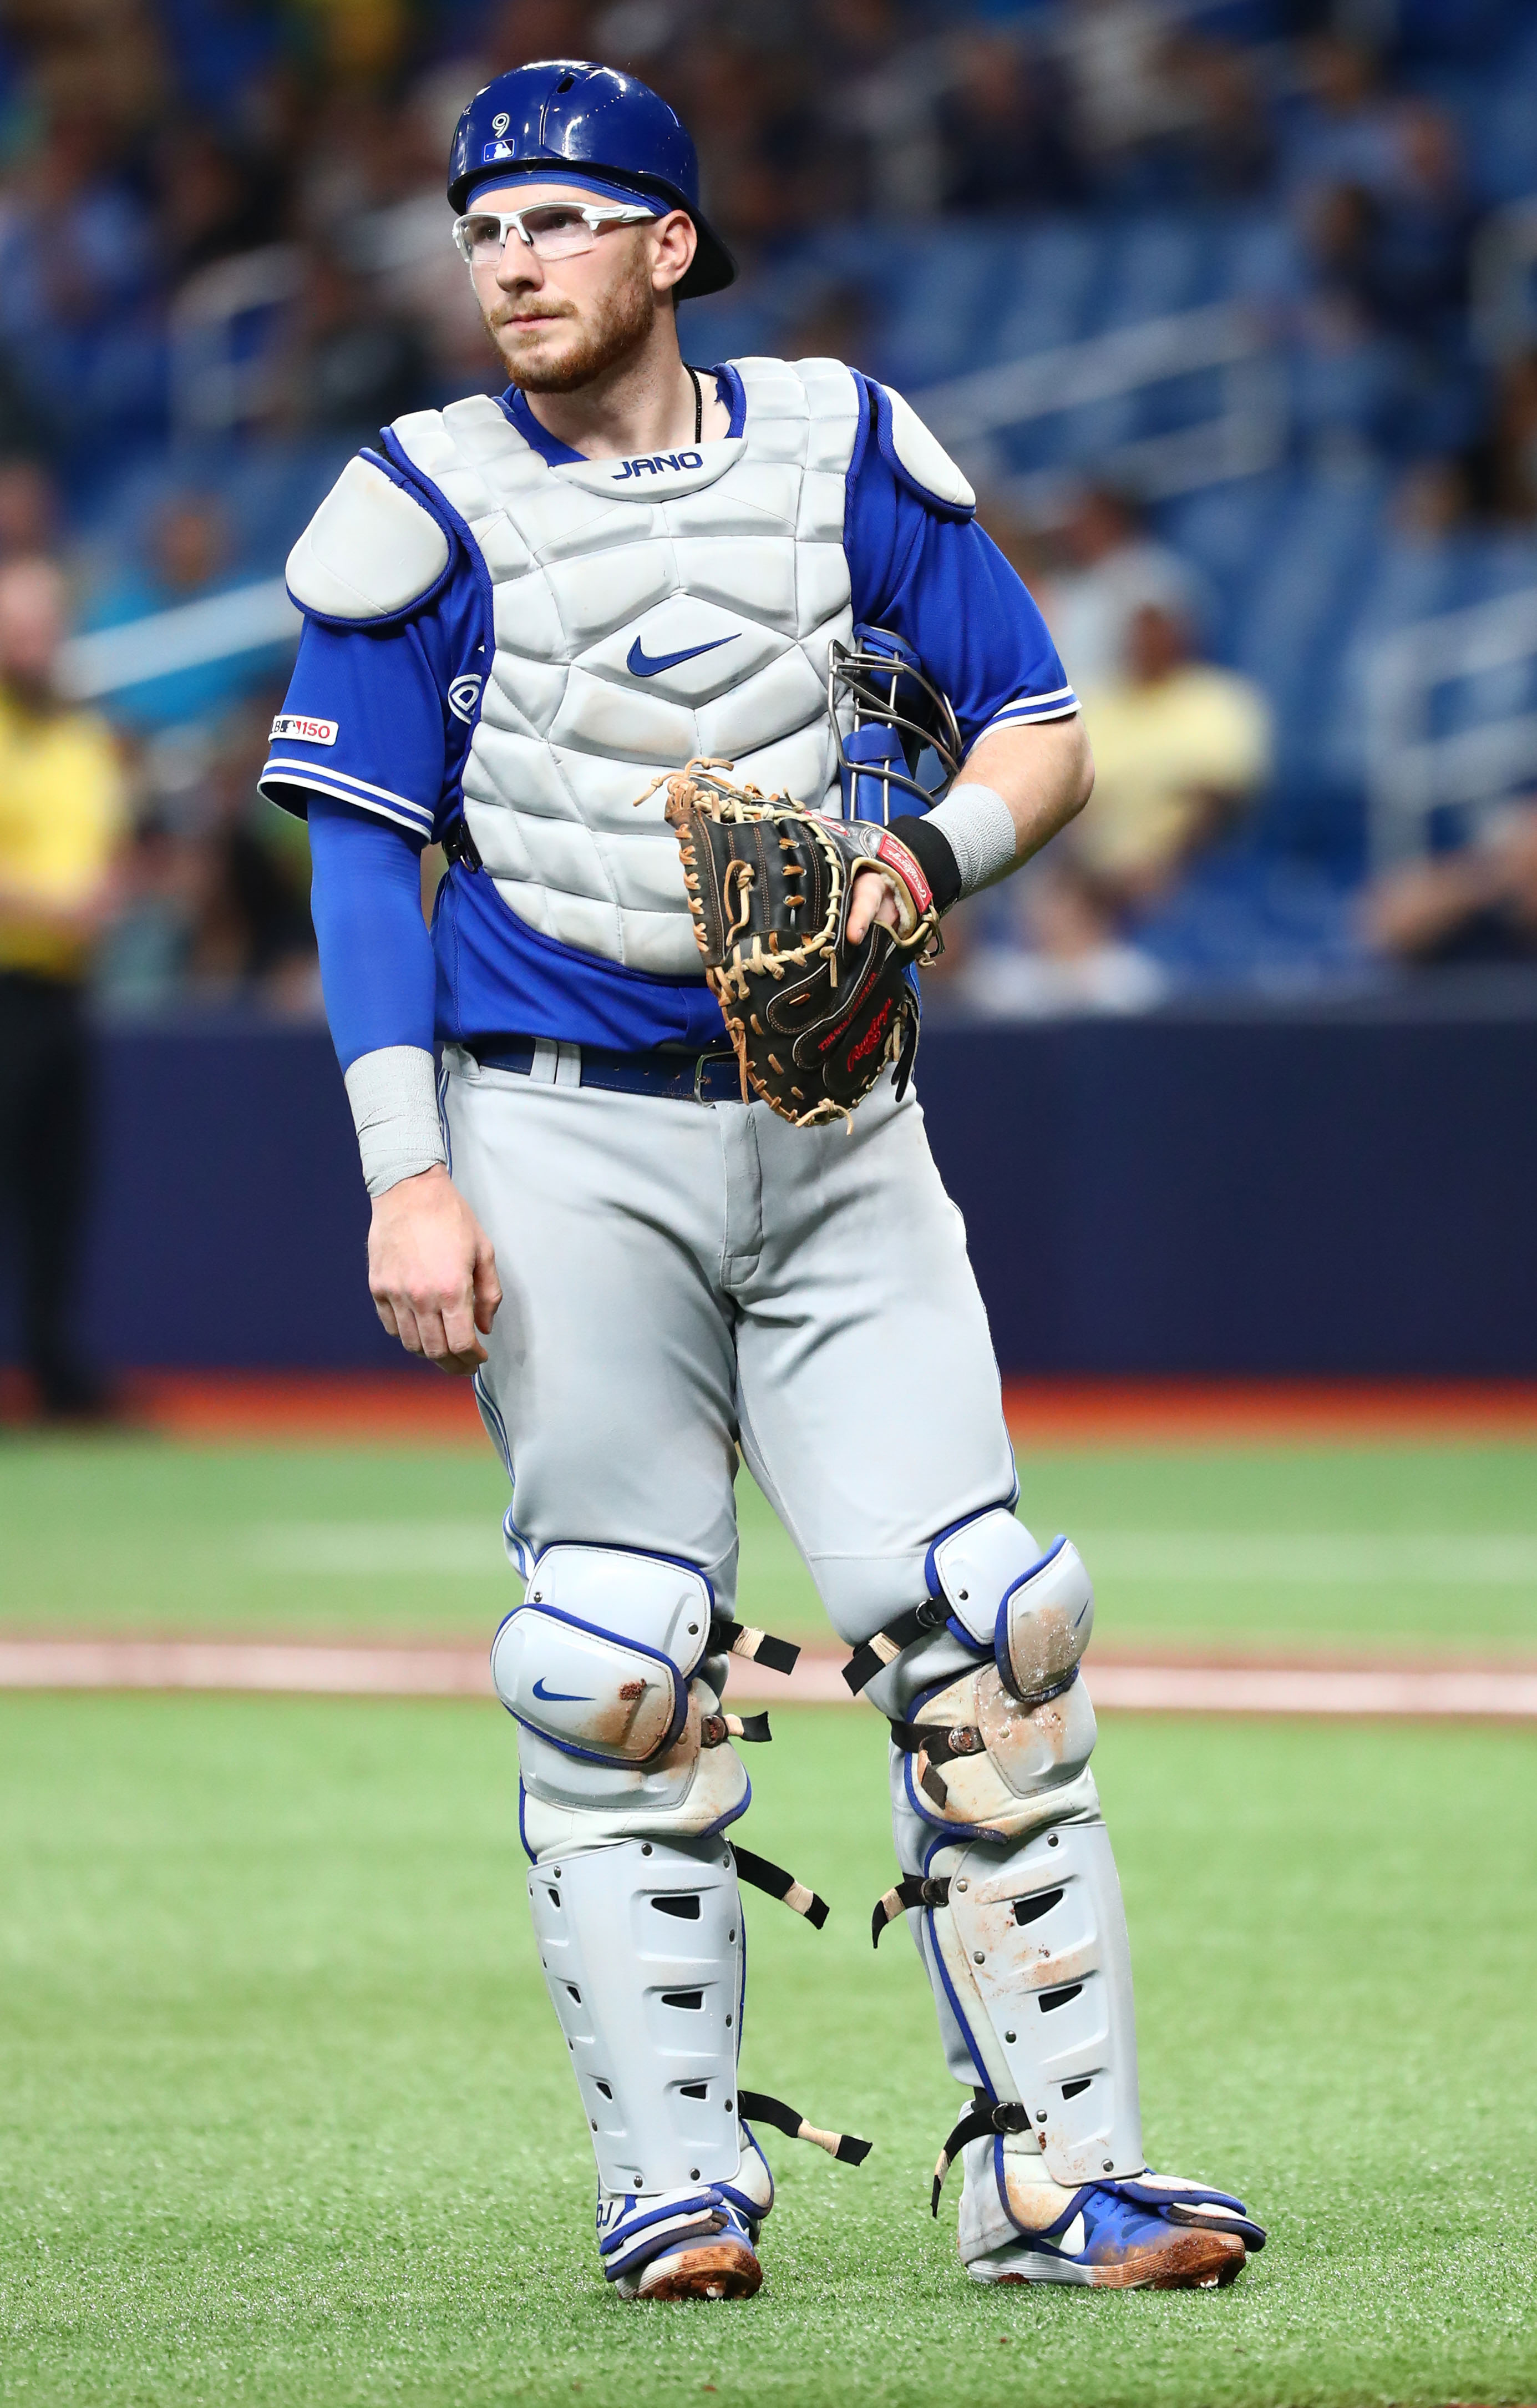 Danny Jansen - MLB Catcher - News, Stats, Bio and more - The Athletic